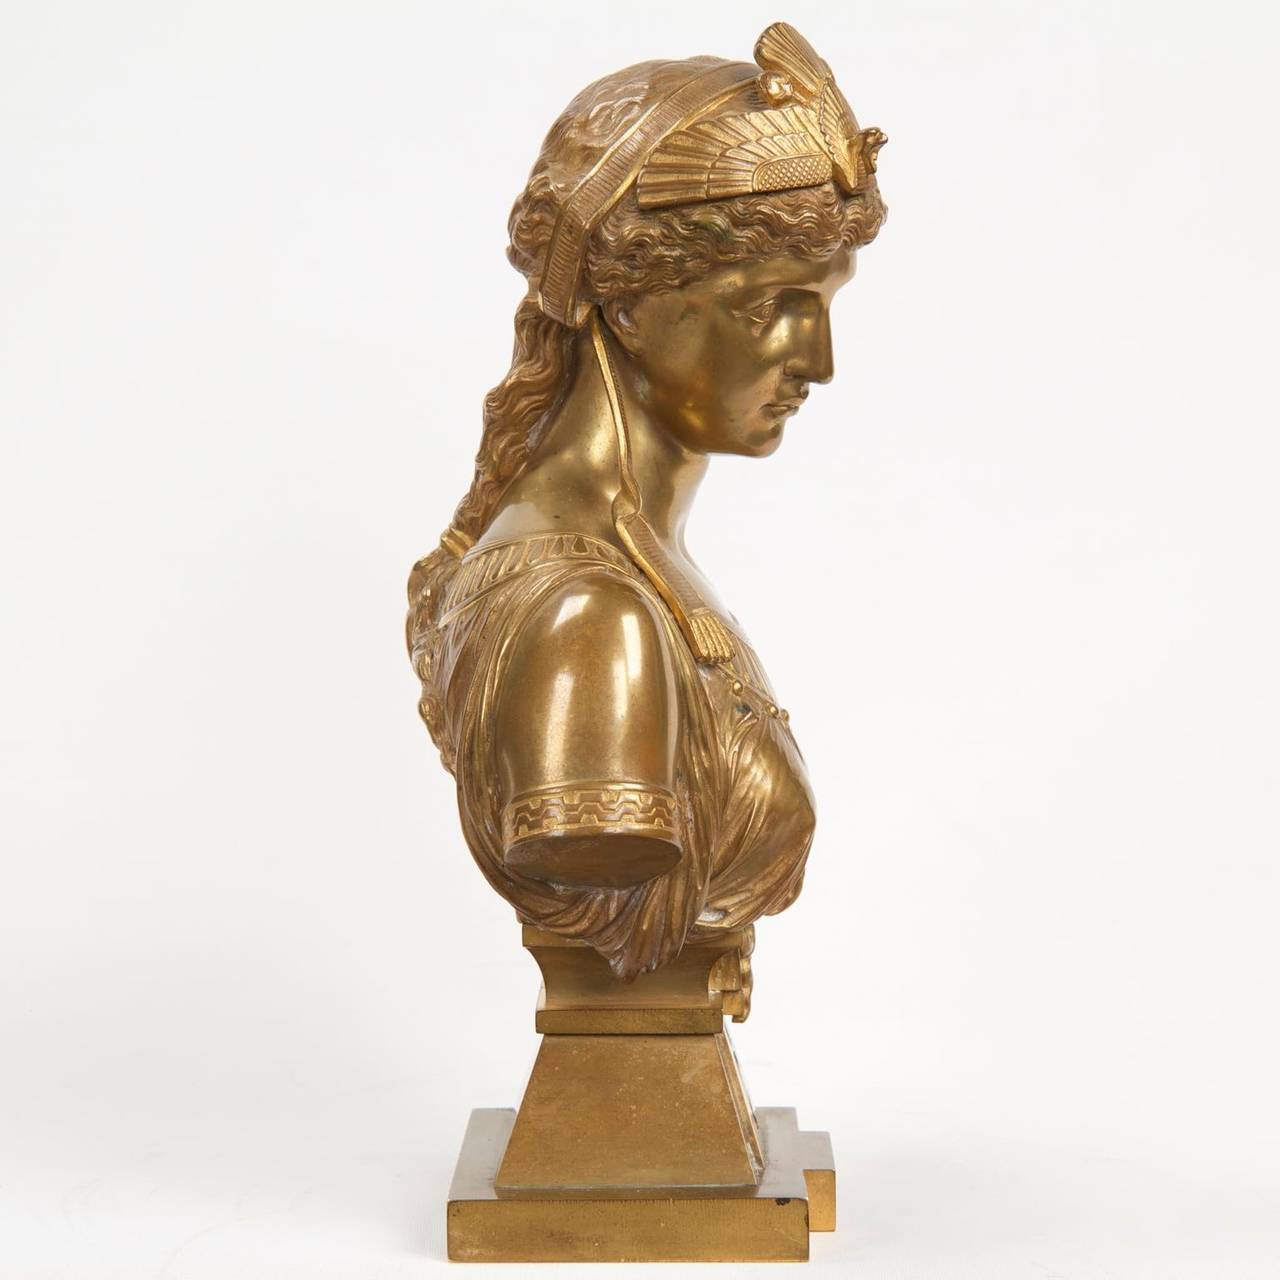 This precisely modeled and incredibly attractive work by Eutrope Bouret was likely cast during the last ten years of the 19th century, the quality and detail of the sculpture without question excellent. The bust depicts Cleopatra with a spread eagle